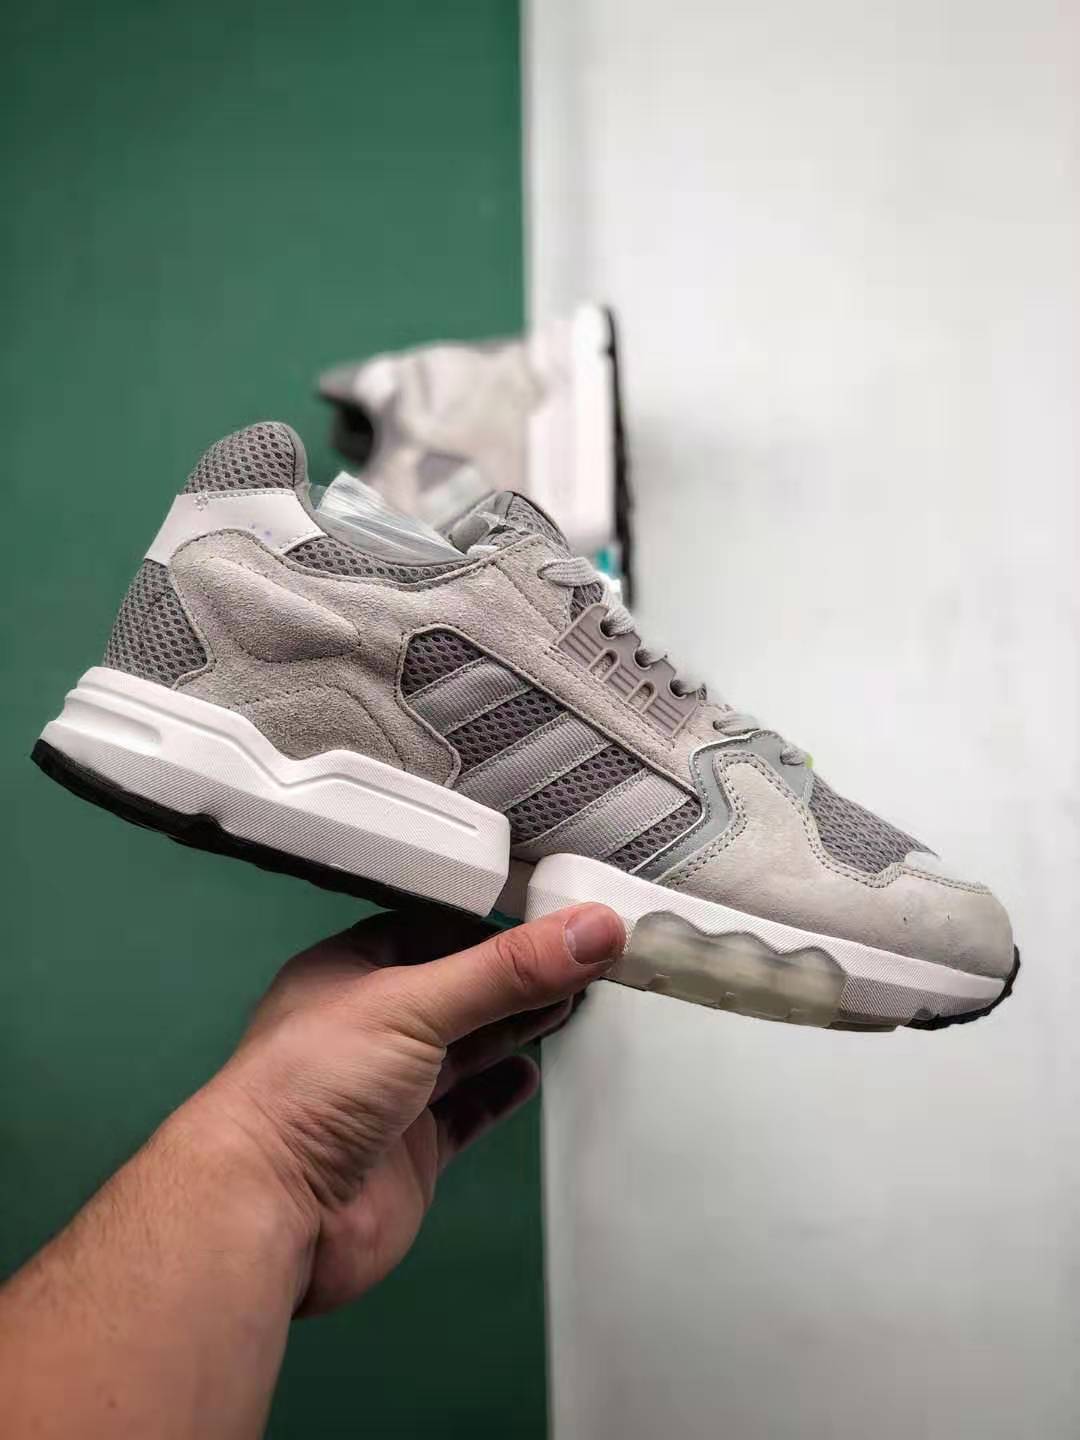 Adidas ZX Torsion Grey Two EE4809 - Modern & Stylish Sneakers